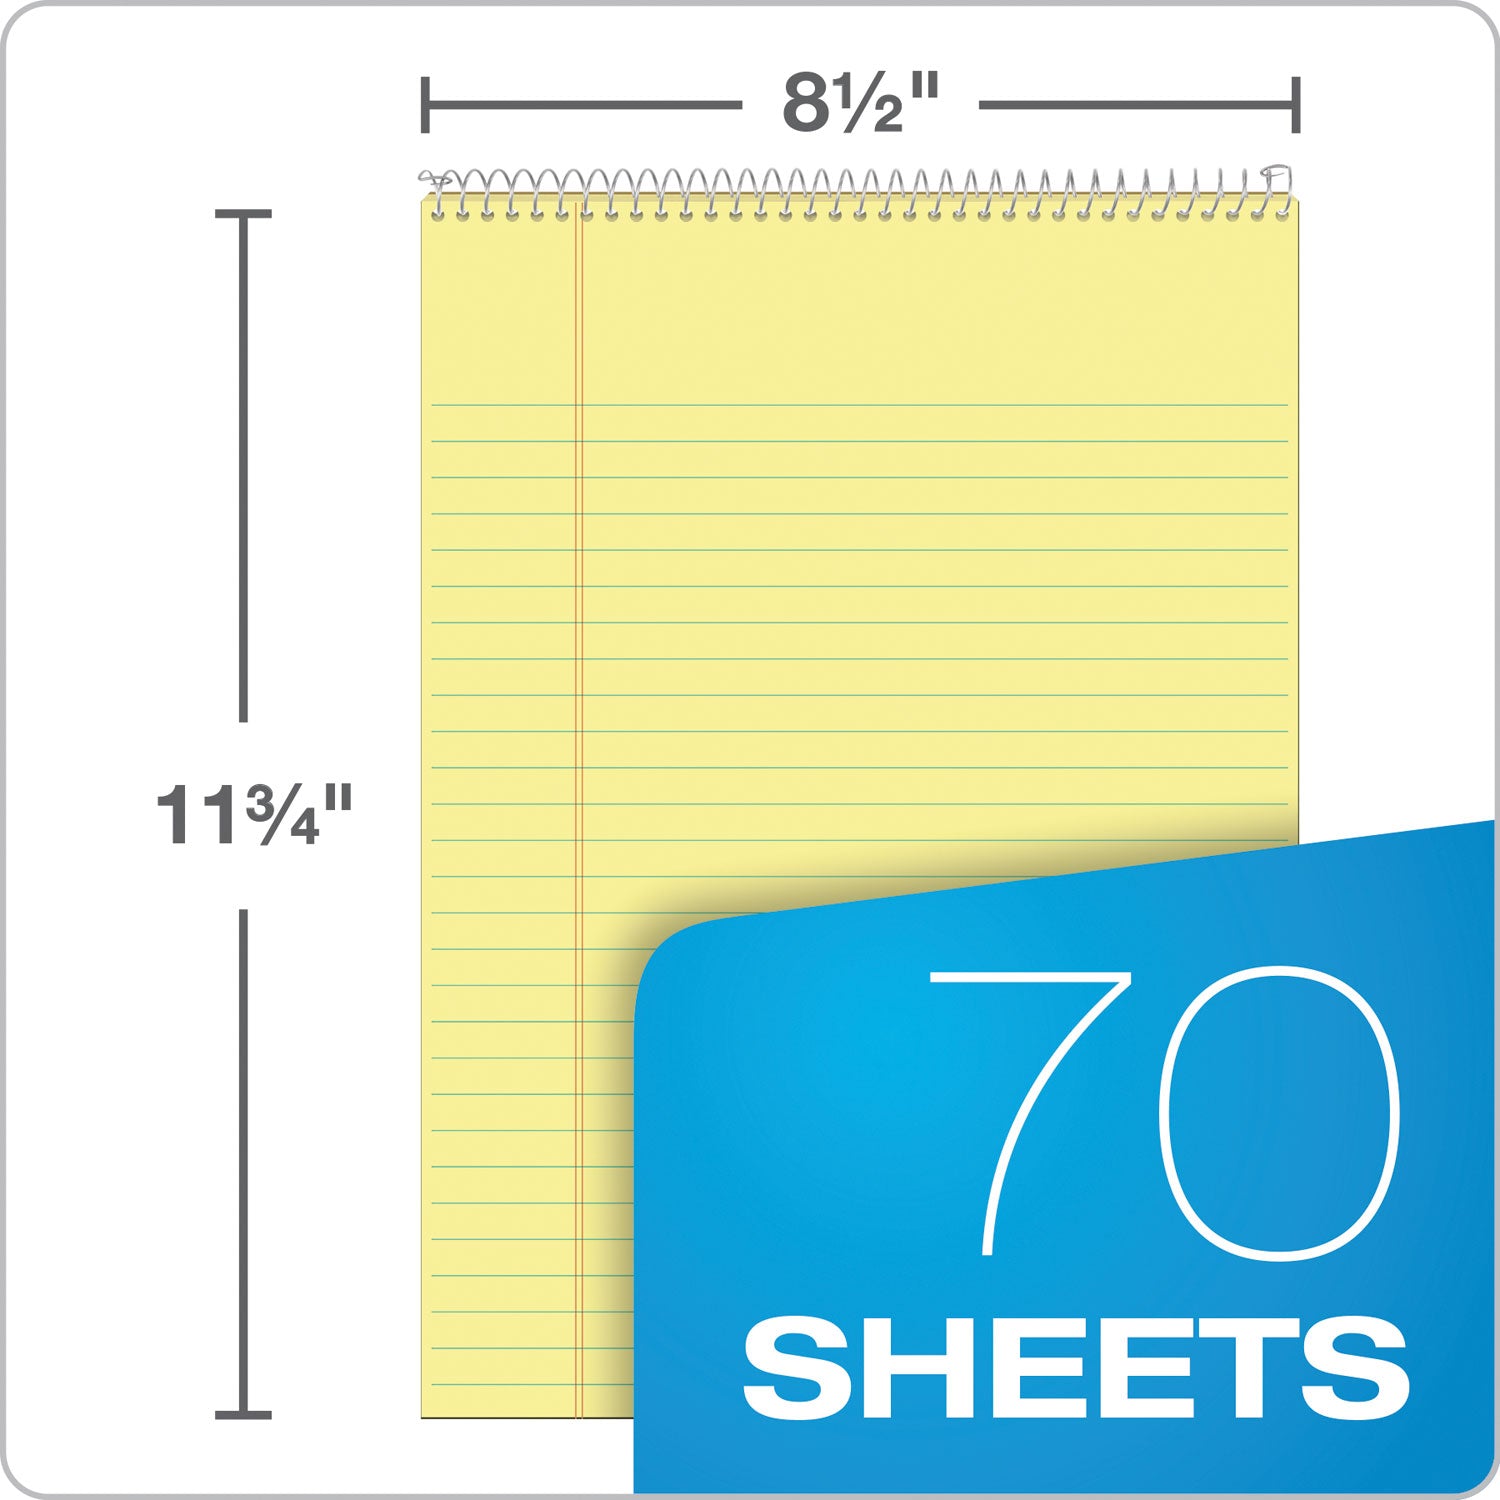 Docket Ruled Wirebound Pad with Cover, Wide/Legal Rule, Blue Cover, 70 Canary-Yellow 8.5 x 11.75 Sheets - 